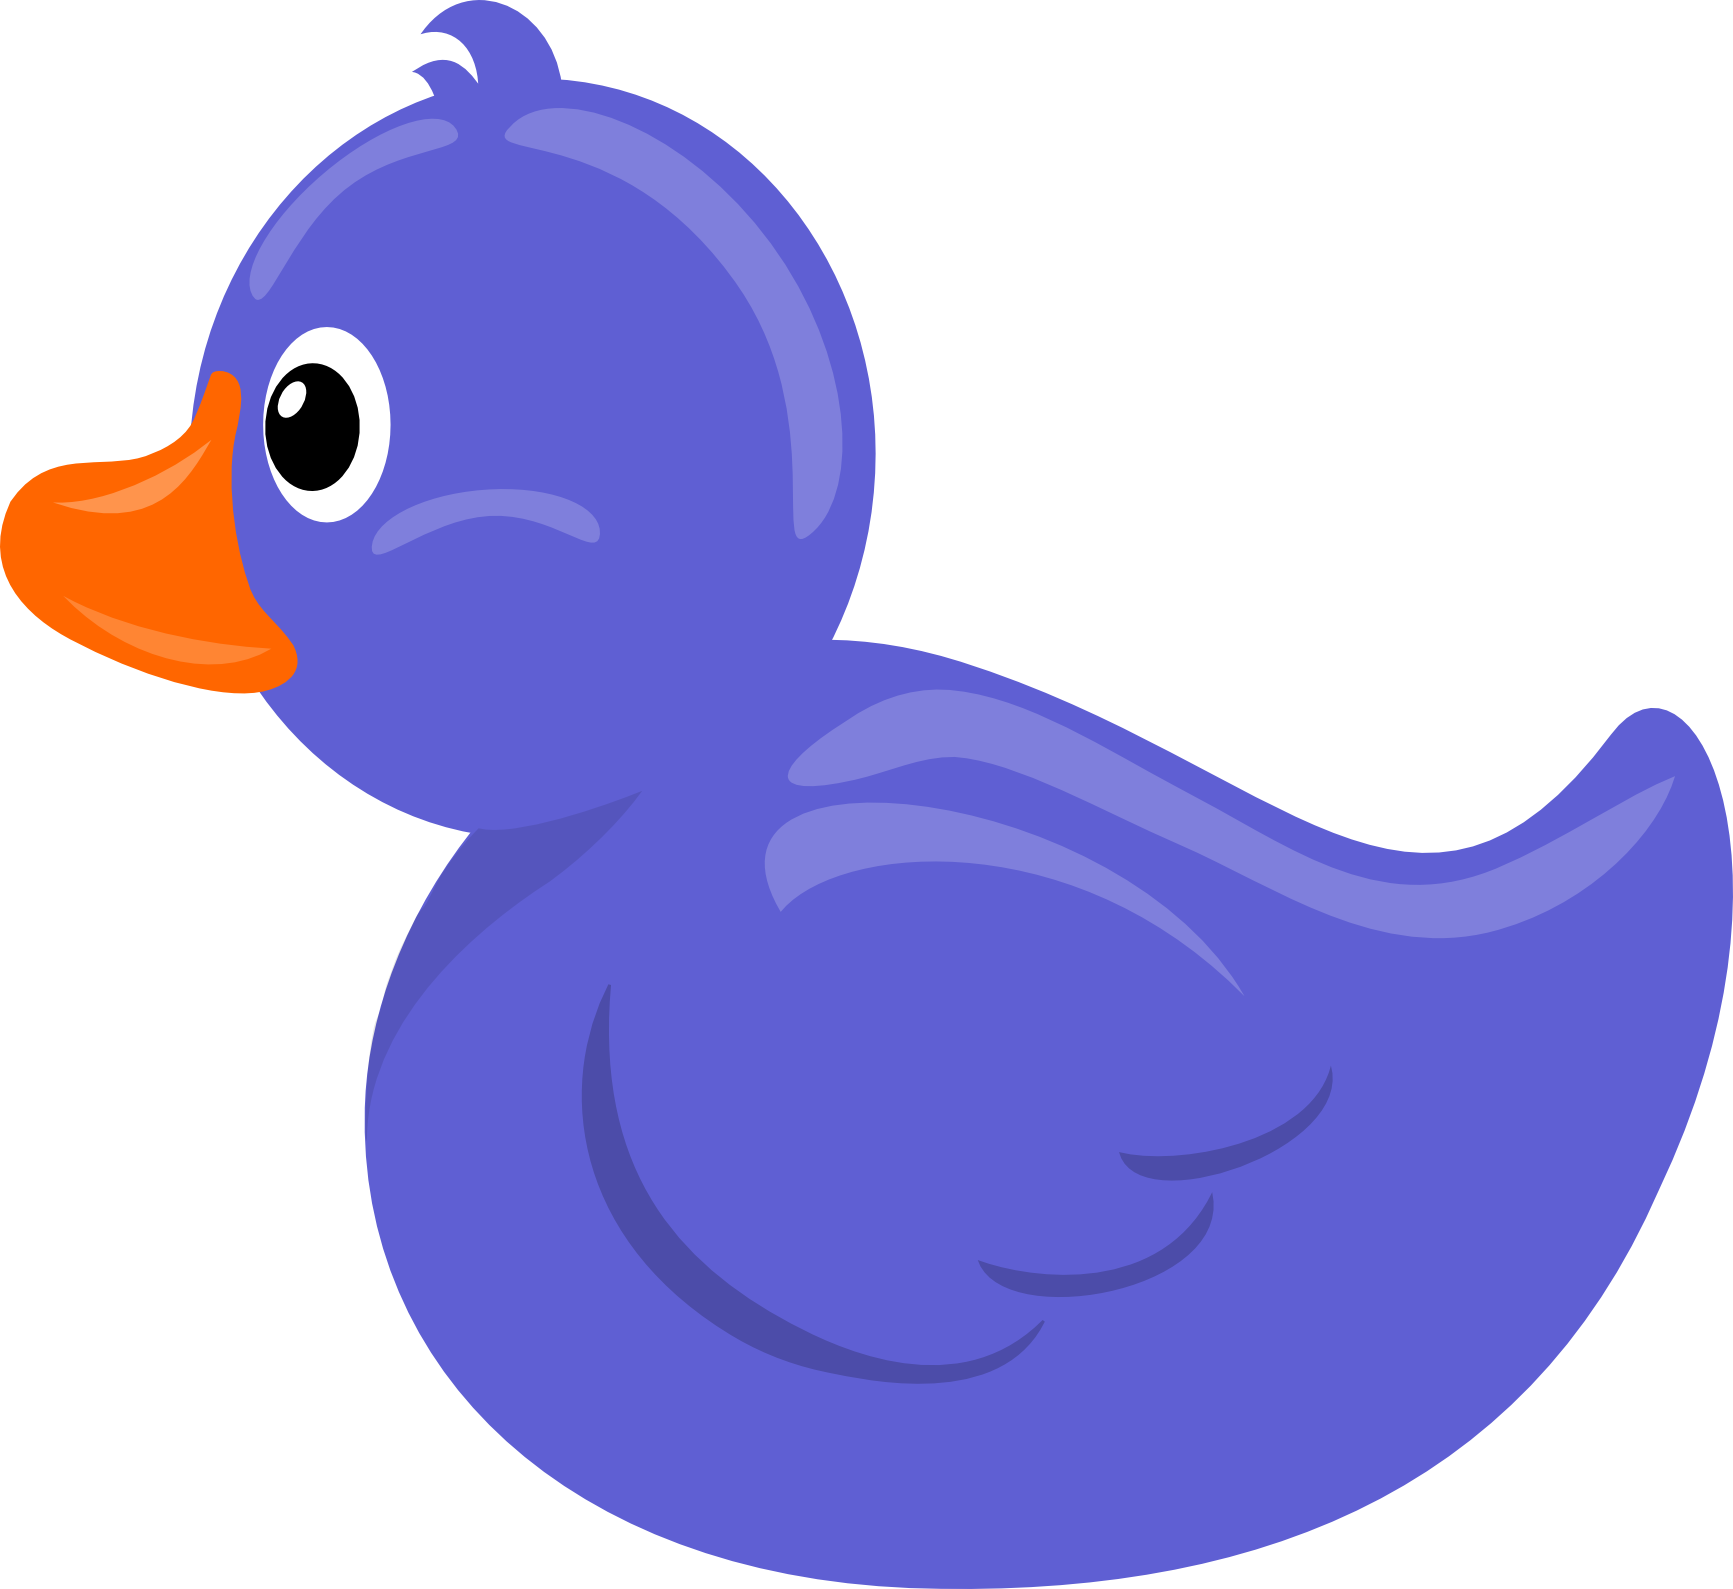 Flying free images image. Home clipart duck